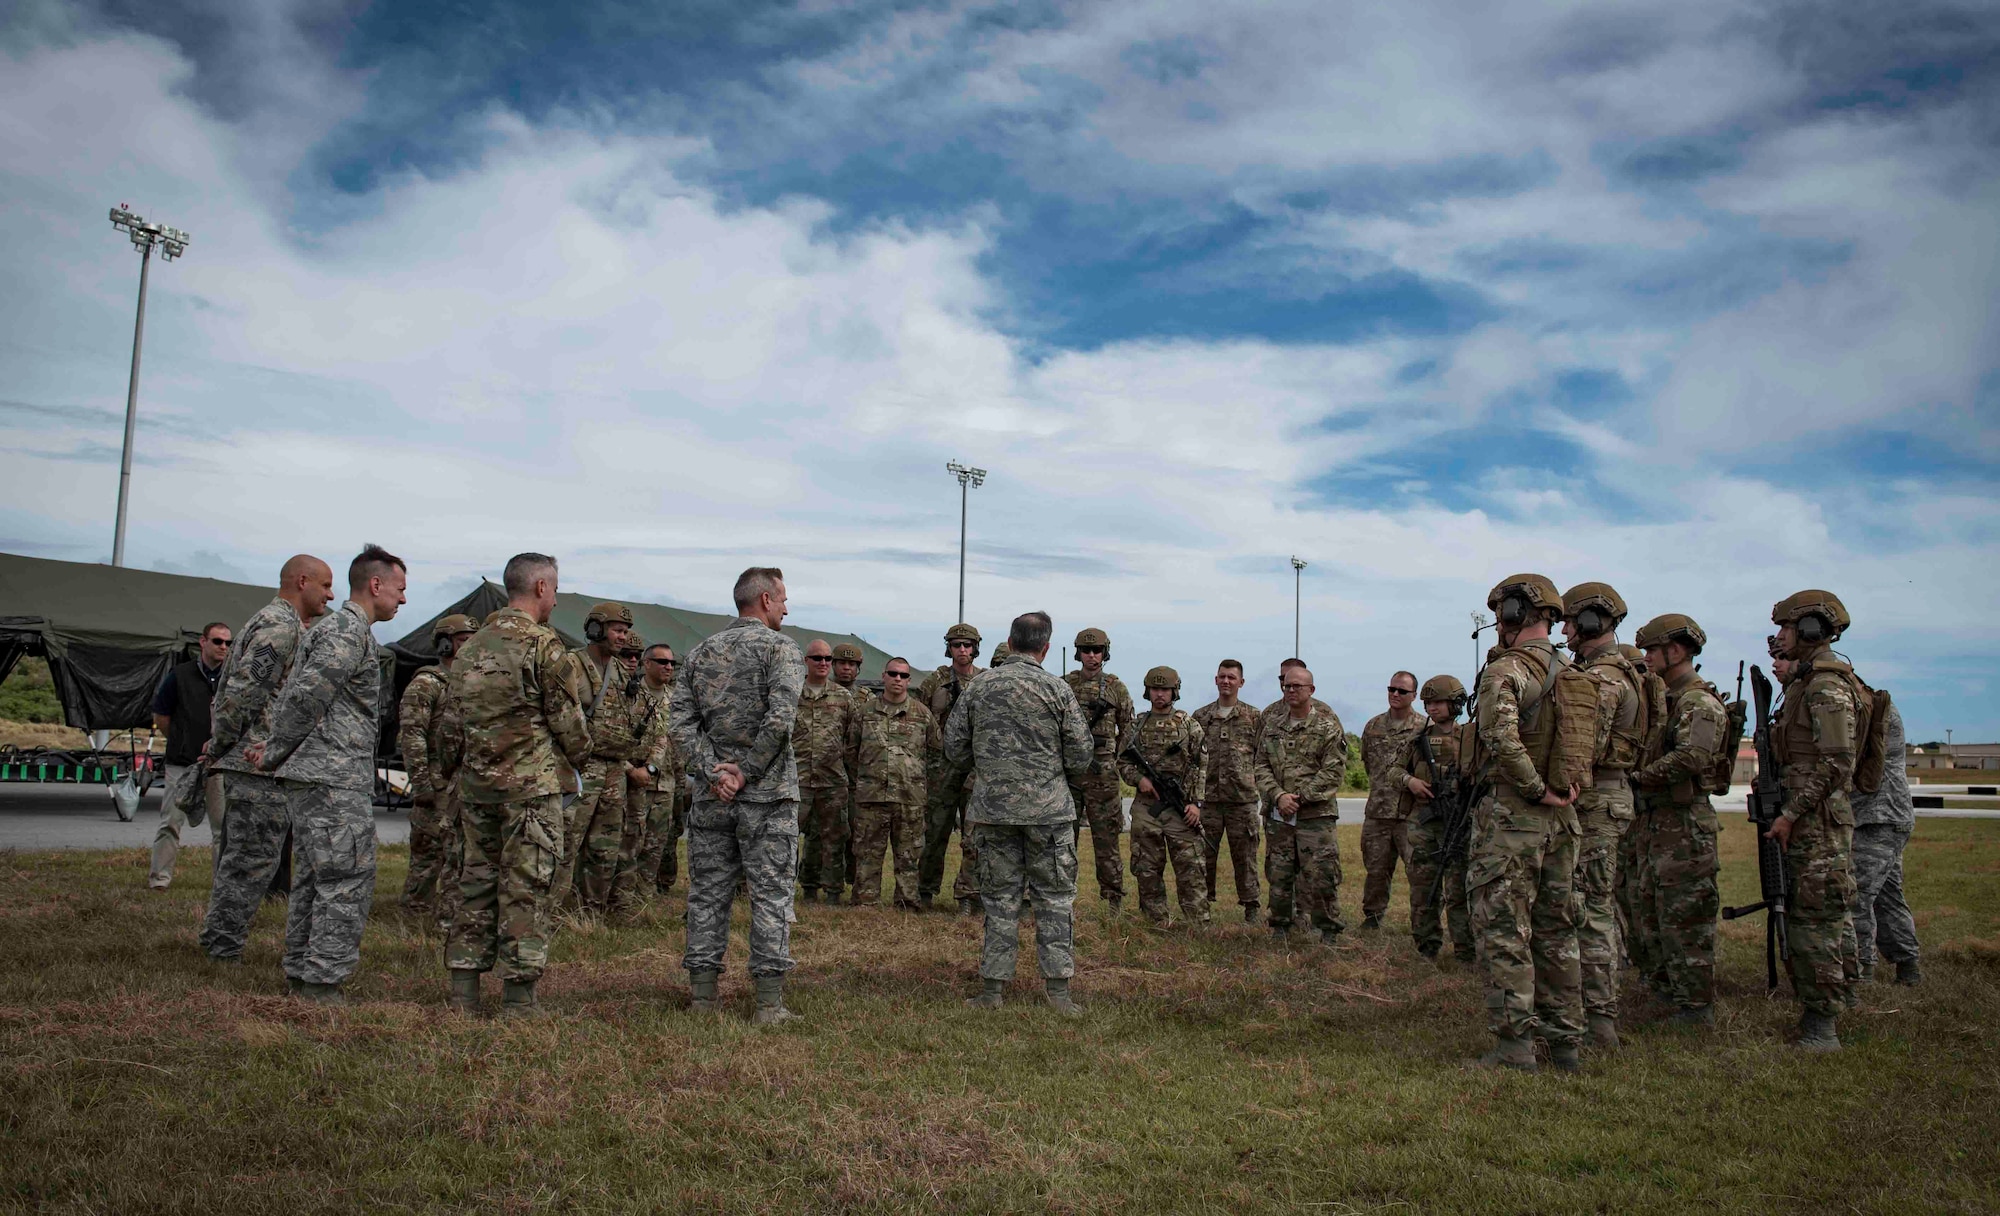 Air Force Chief of Staff Gen. David L.  Goldfein, meets members of the 36th Contingency Response Group at Andersen Air Force Base, Guam, Feb. 8, 2018. Goldfein met with members of Team Andersen, during his first visit to Andersen AFB as chief of staff.  (U.S. Air Force photo by Staff Sgt. Alexander W. Riedel)